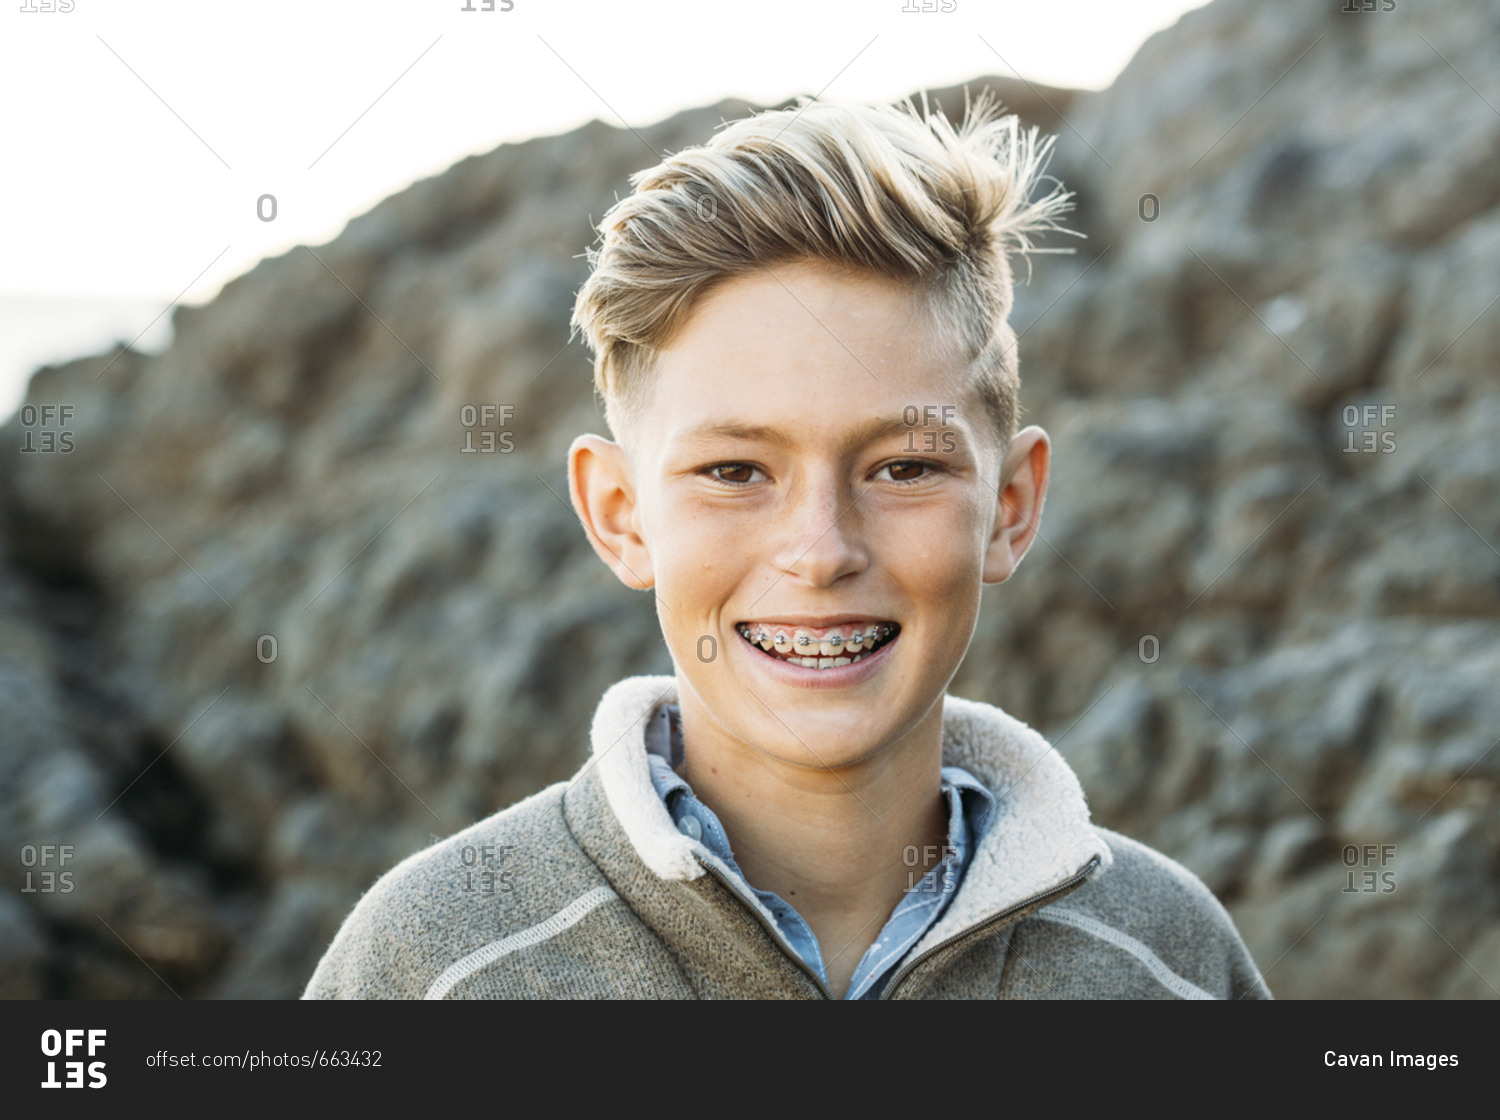 Portrait of smiling boy with braces at beach